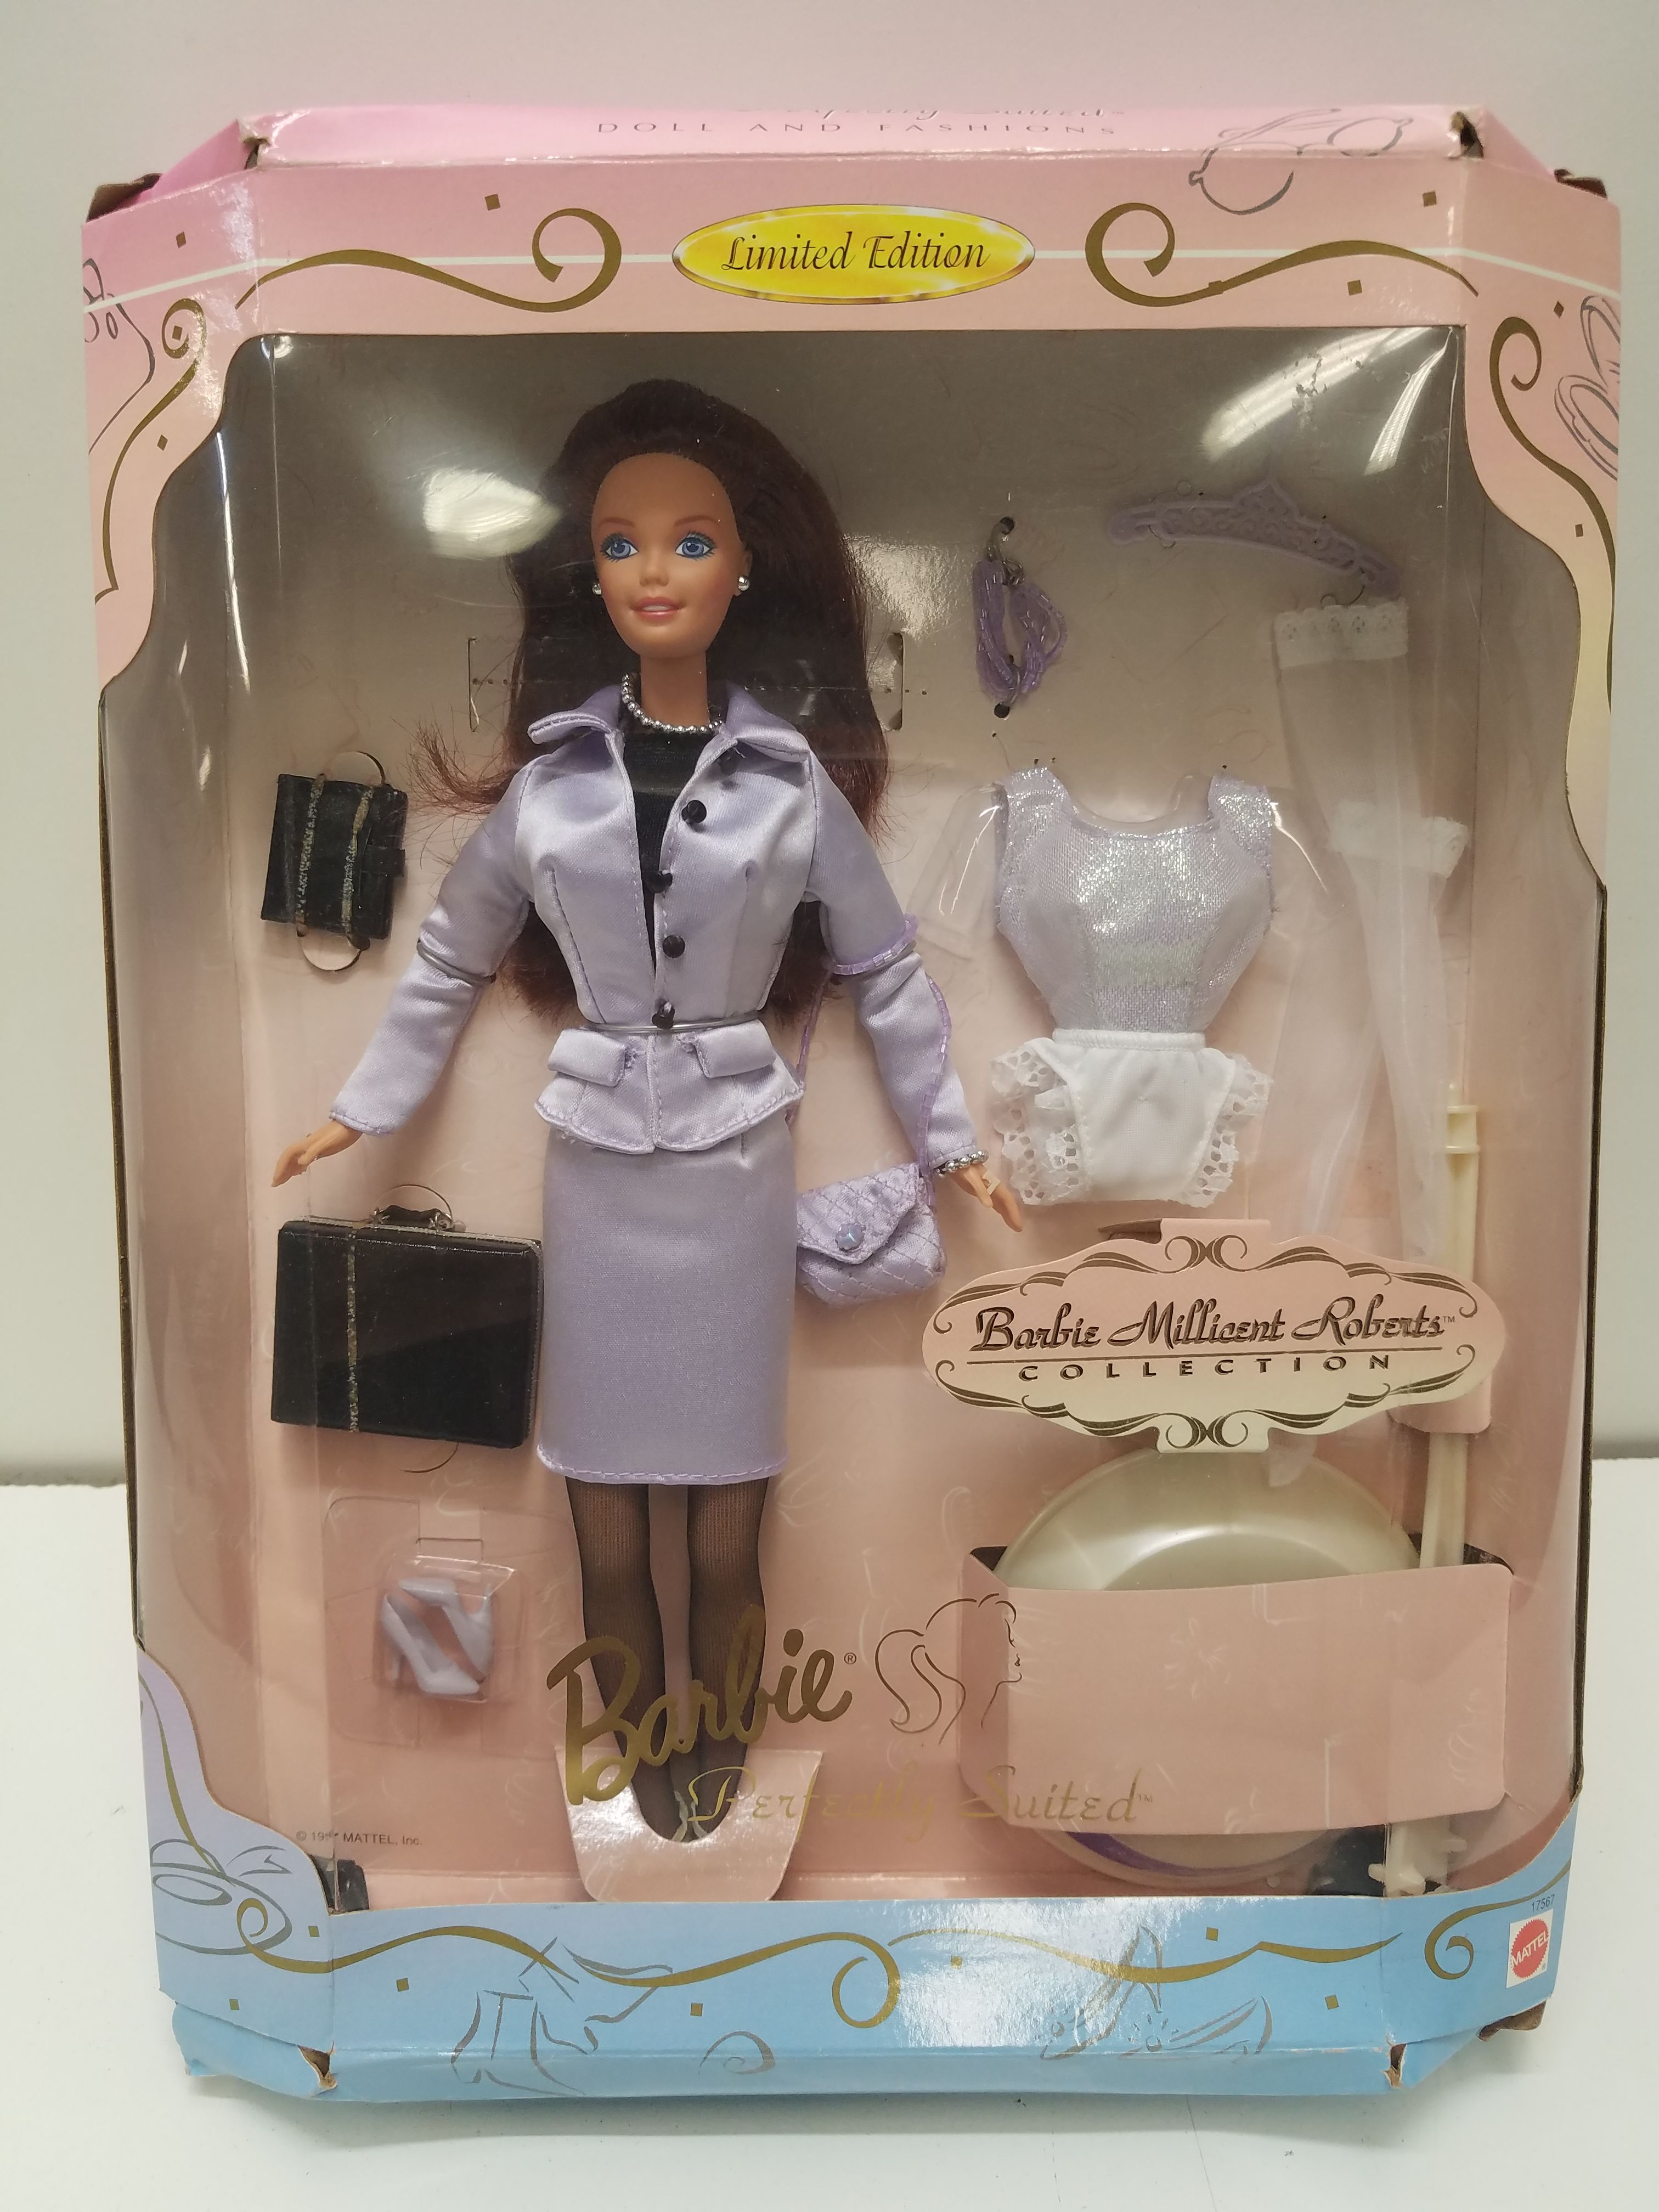 Buy The Perfectly Suited Barbie Doll Limited Edition Barbie Millicent Roberts Nrfb 17567